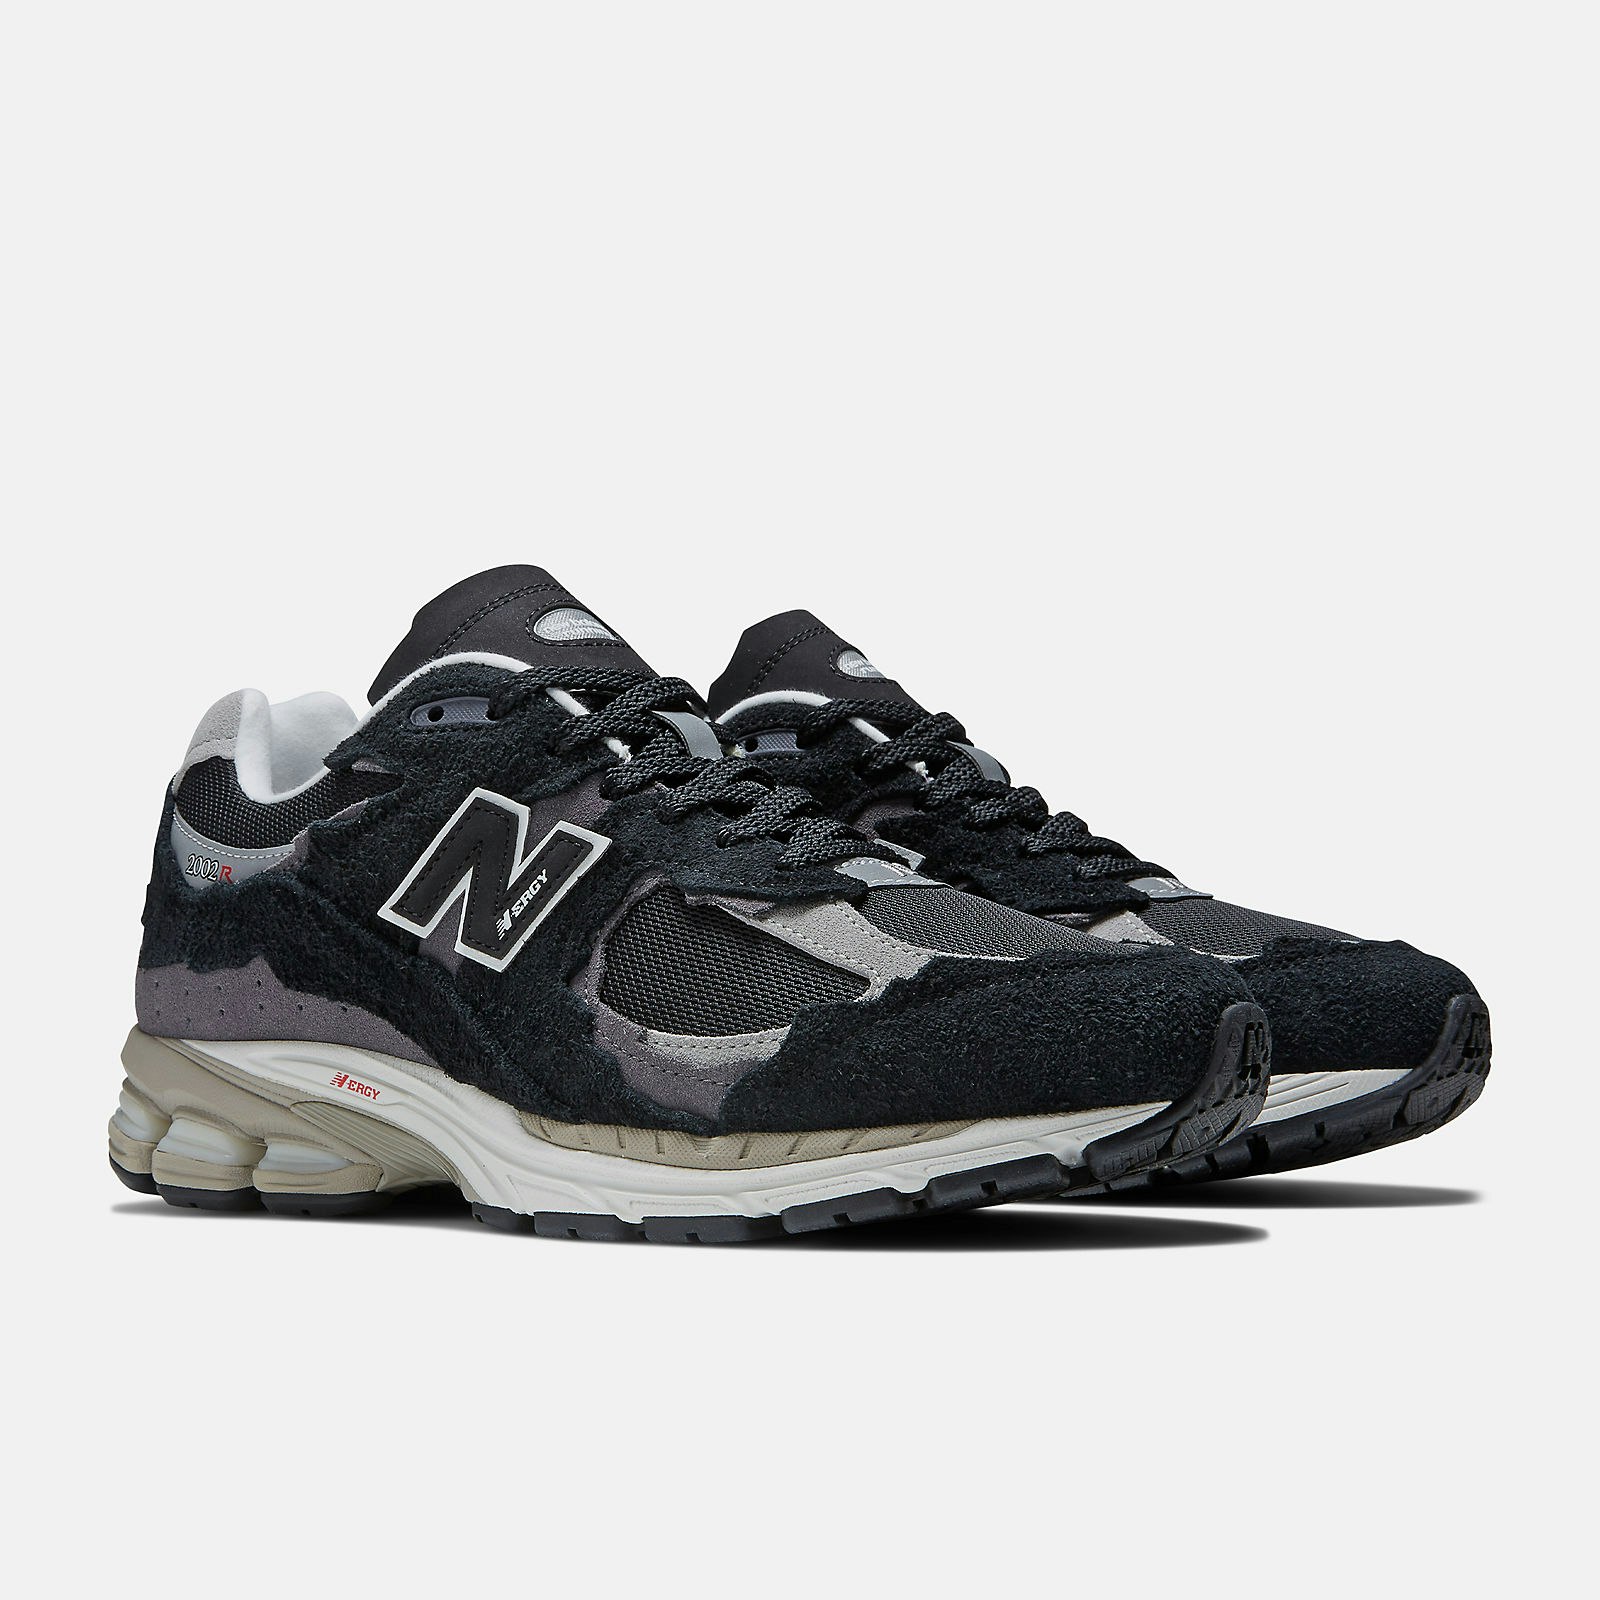 New Balance 2002R "Protection Pack" (Black)